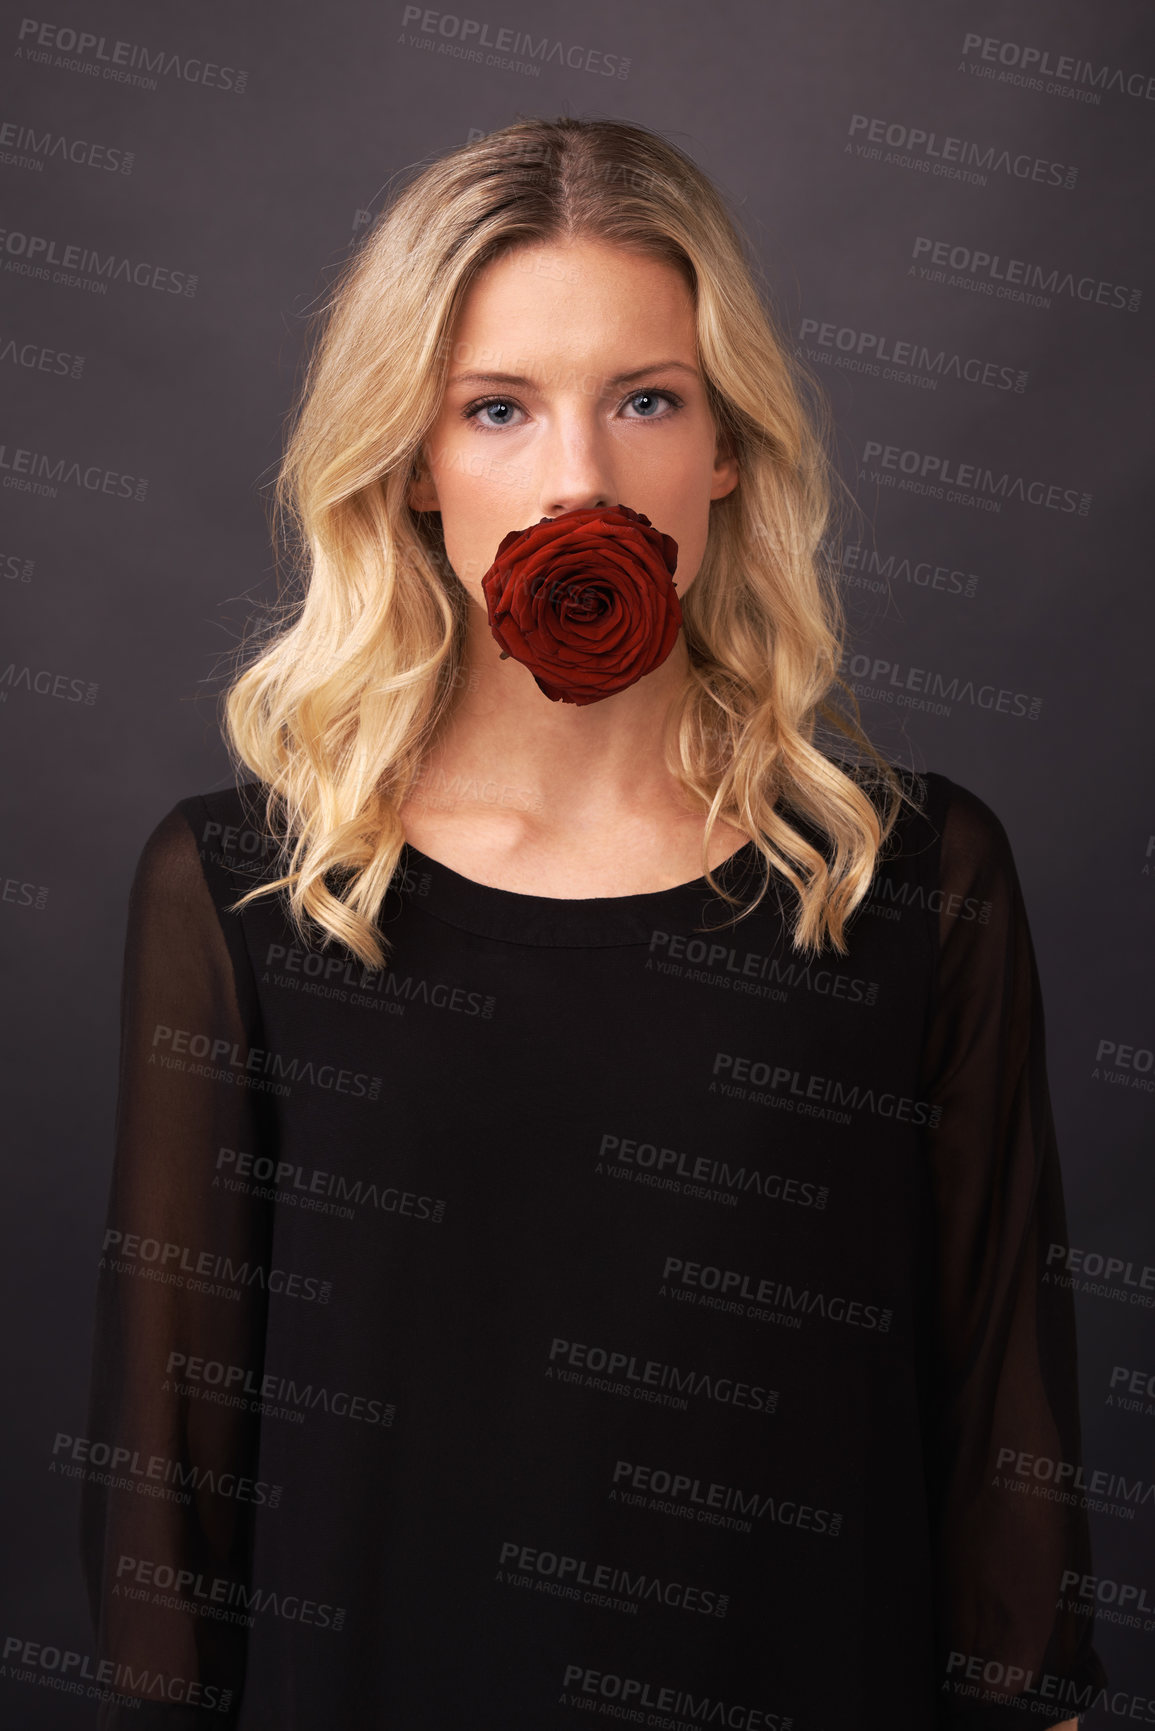 Buy stock photo Conceptual image of a blonde woman with a rose covering her mouth